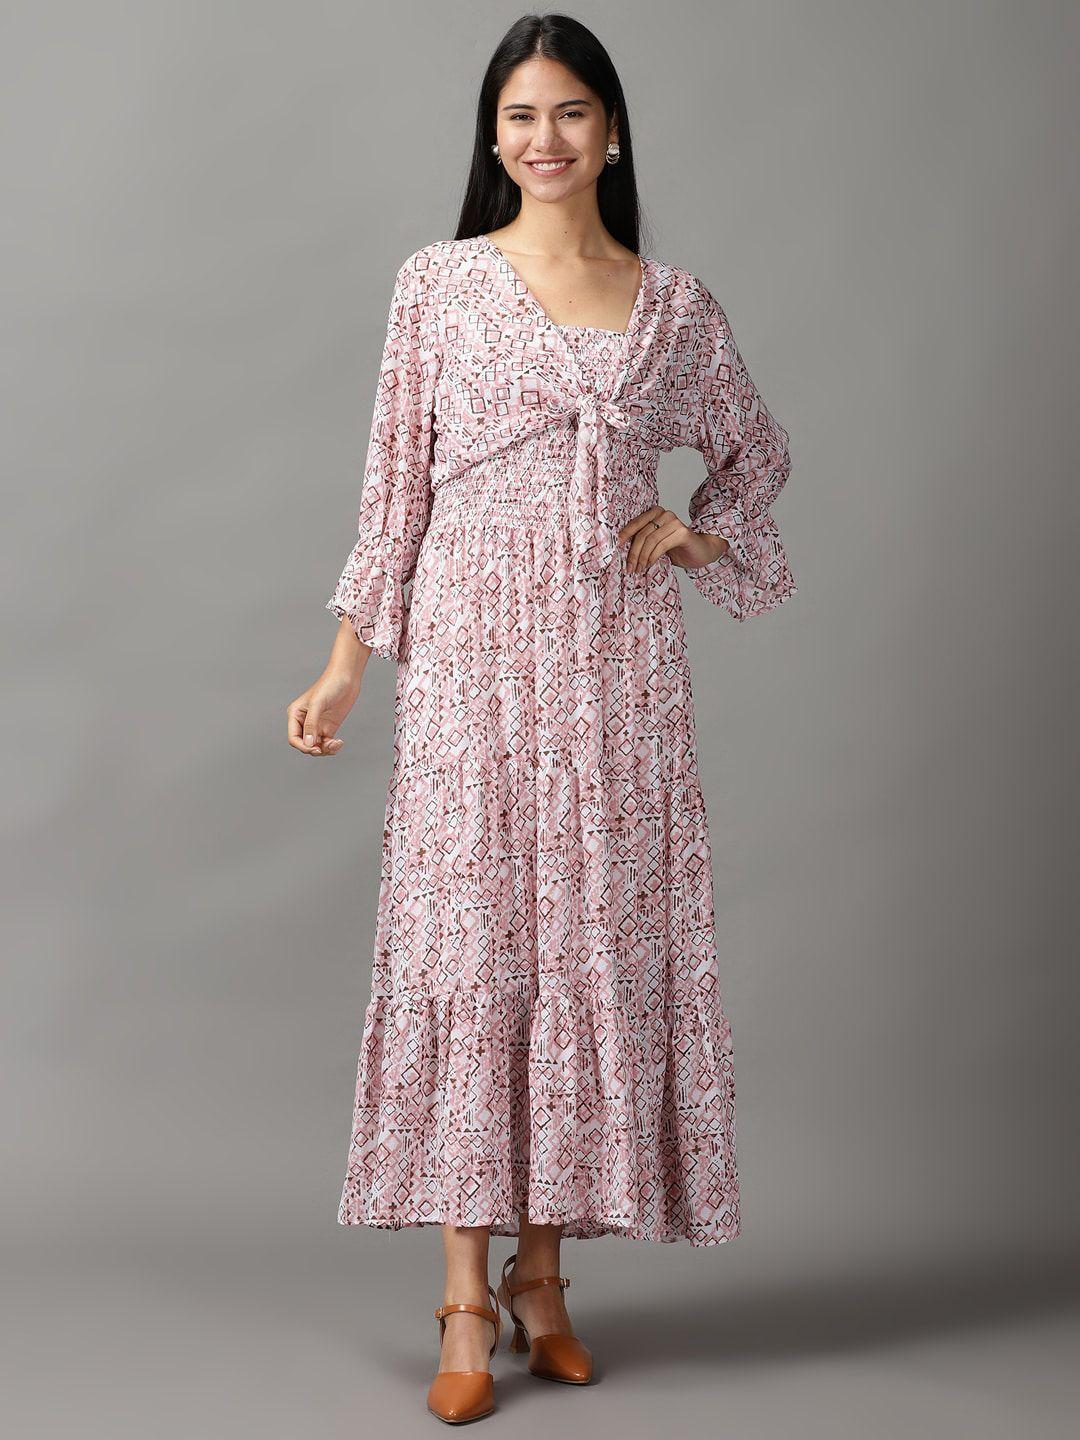 showoff-geometric-printed-smocked-fit-&-flare-maxi-dress-with-shrug